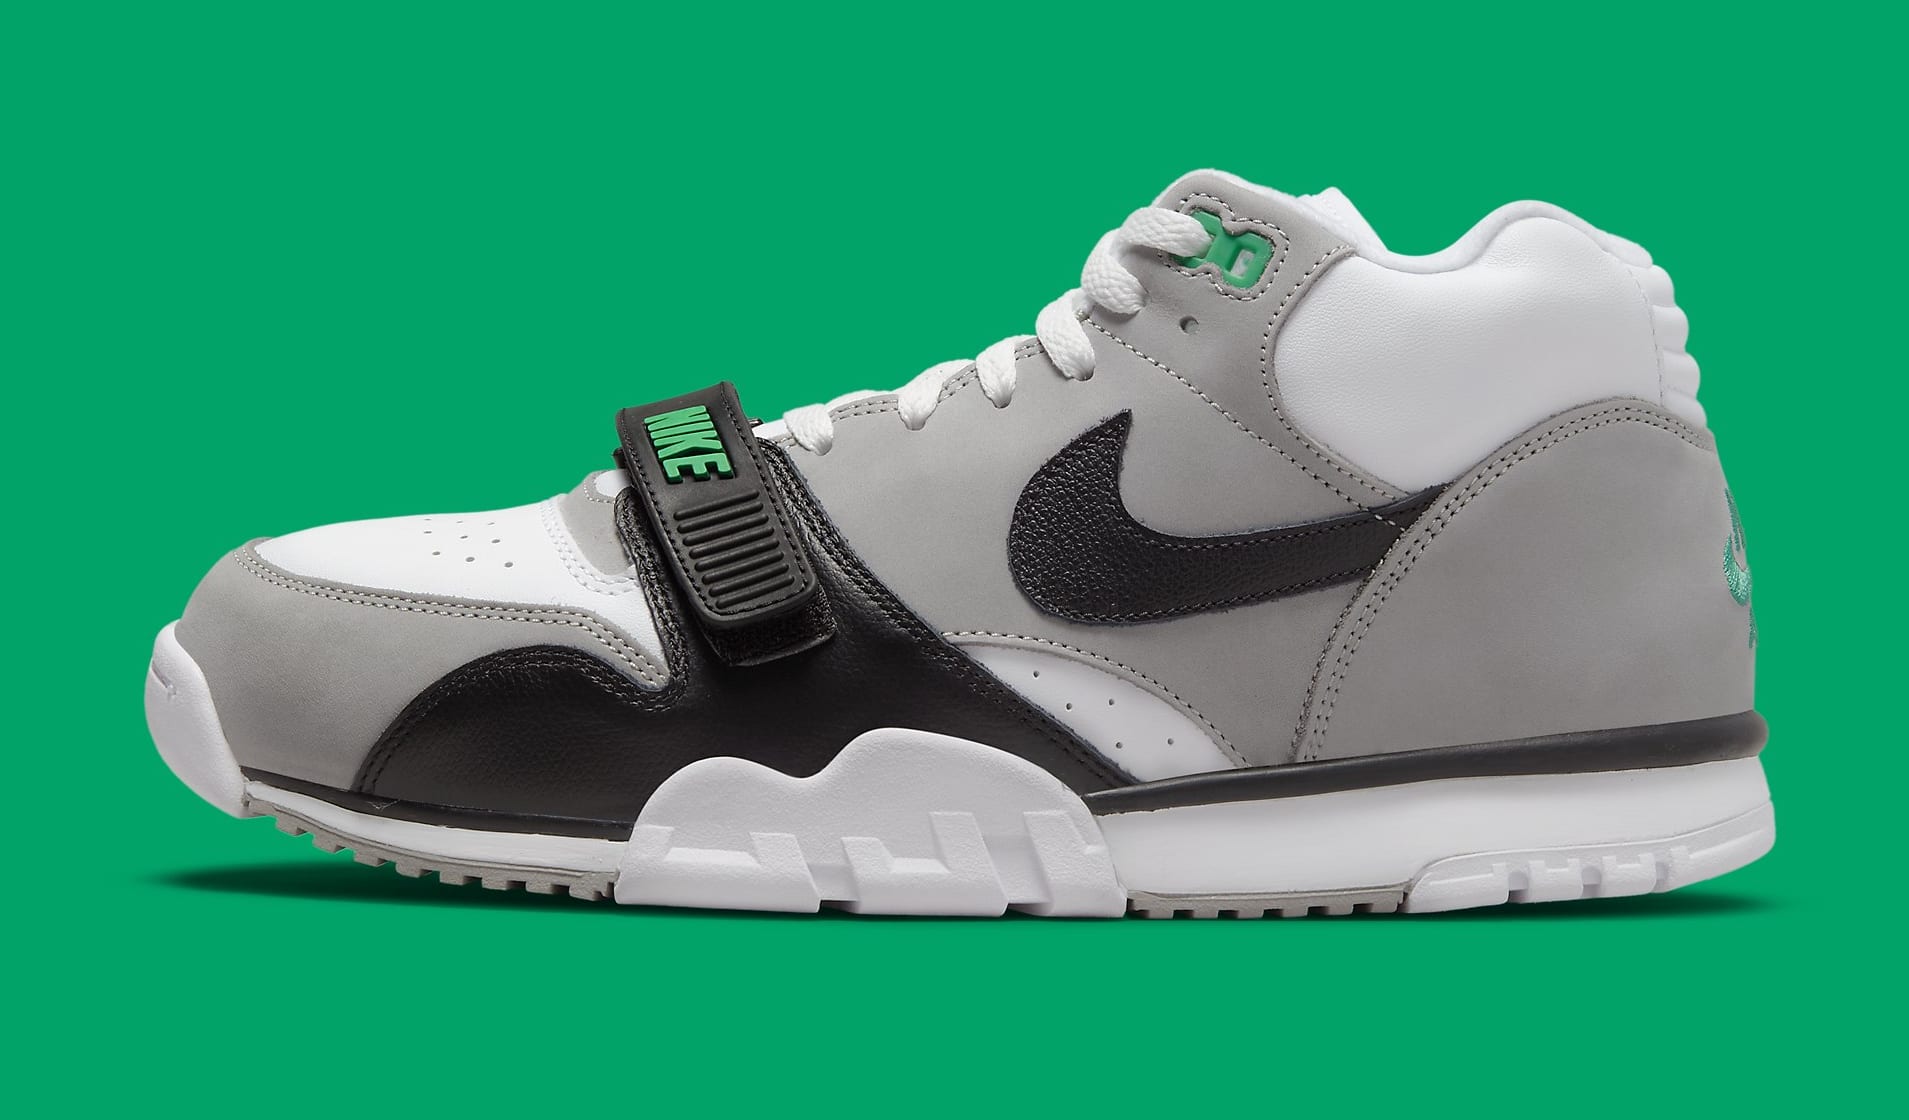 Nike Air Trainer 1 'Chlorophyll' 2022 DM0521 100 Lateral